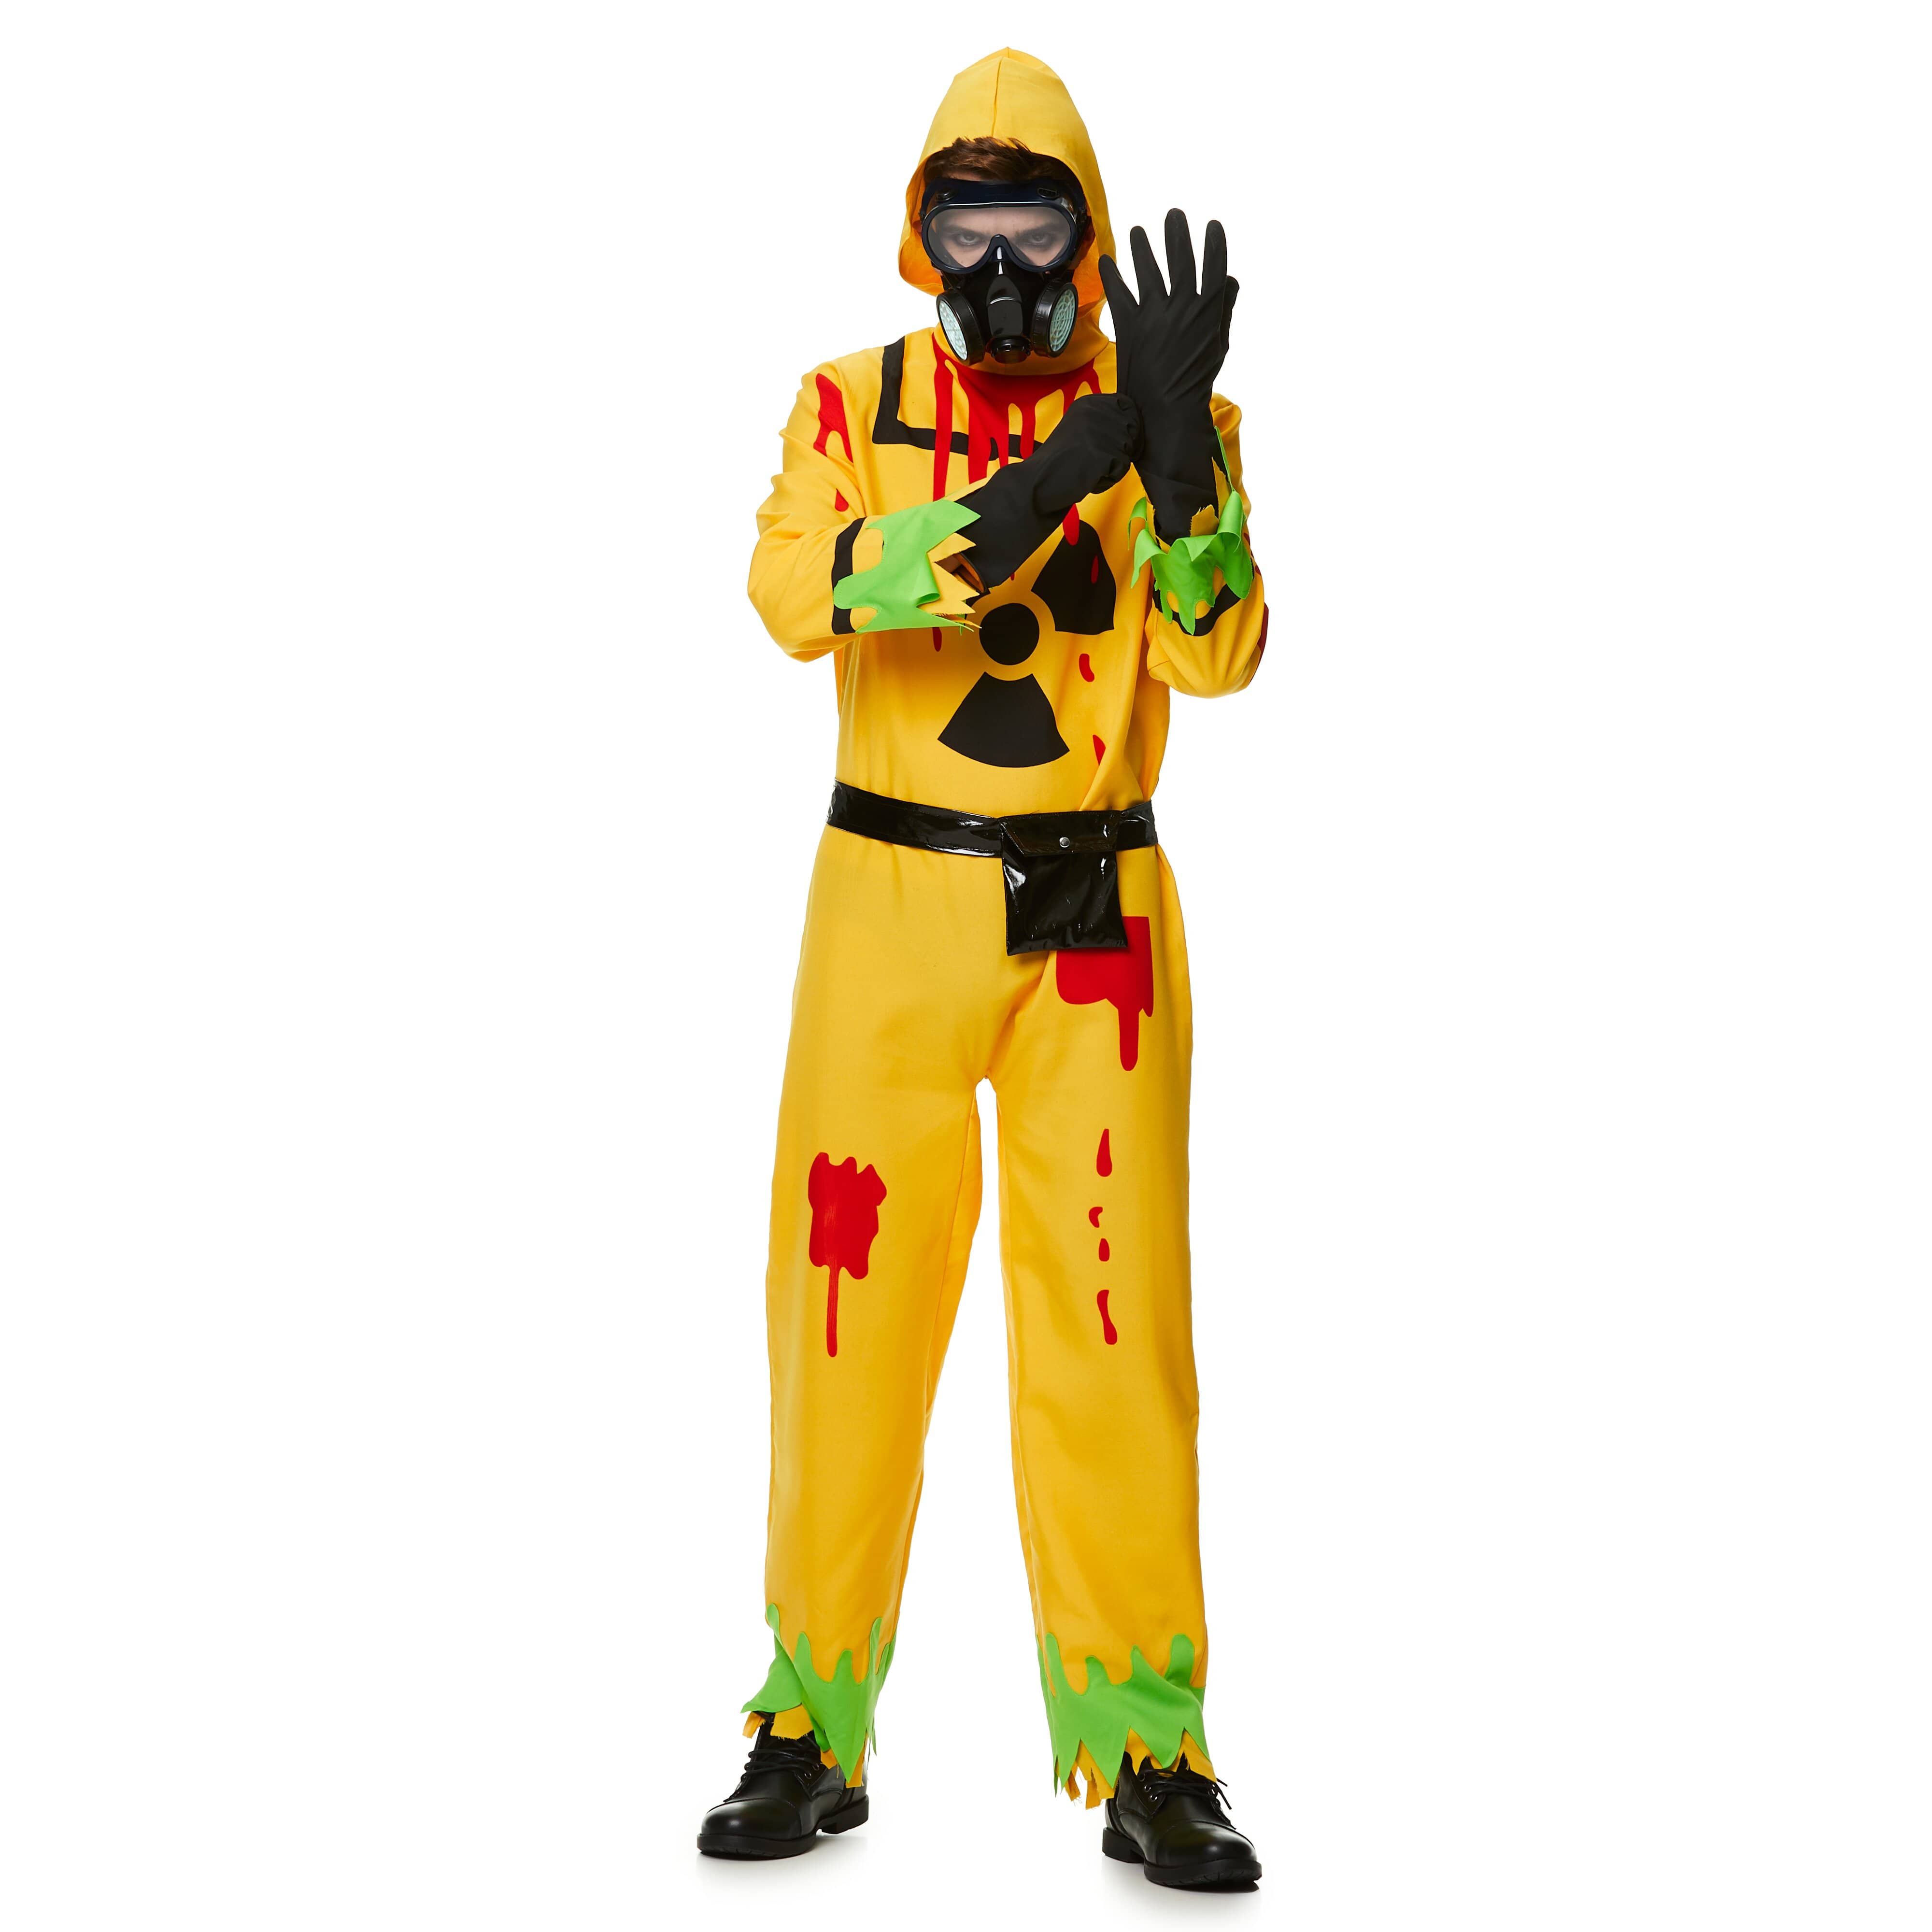 Toxic Biosuit Tainted Radiation Worker Deluxe Adult Costume